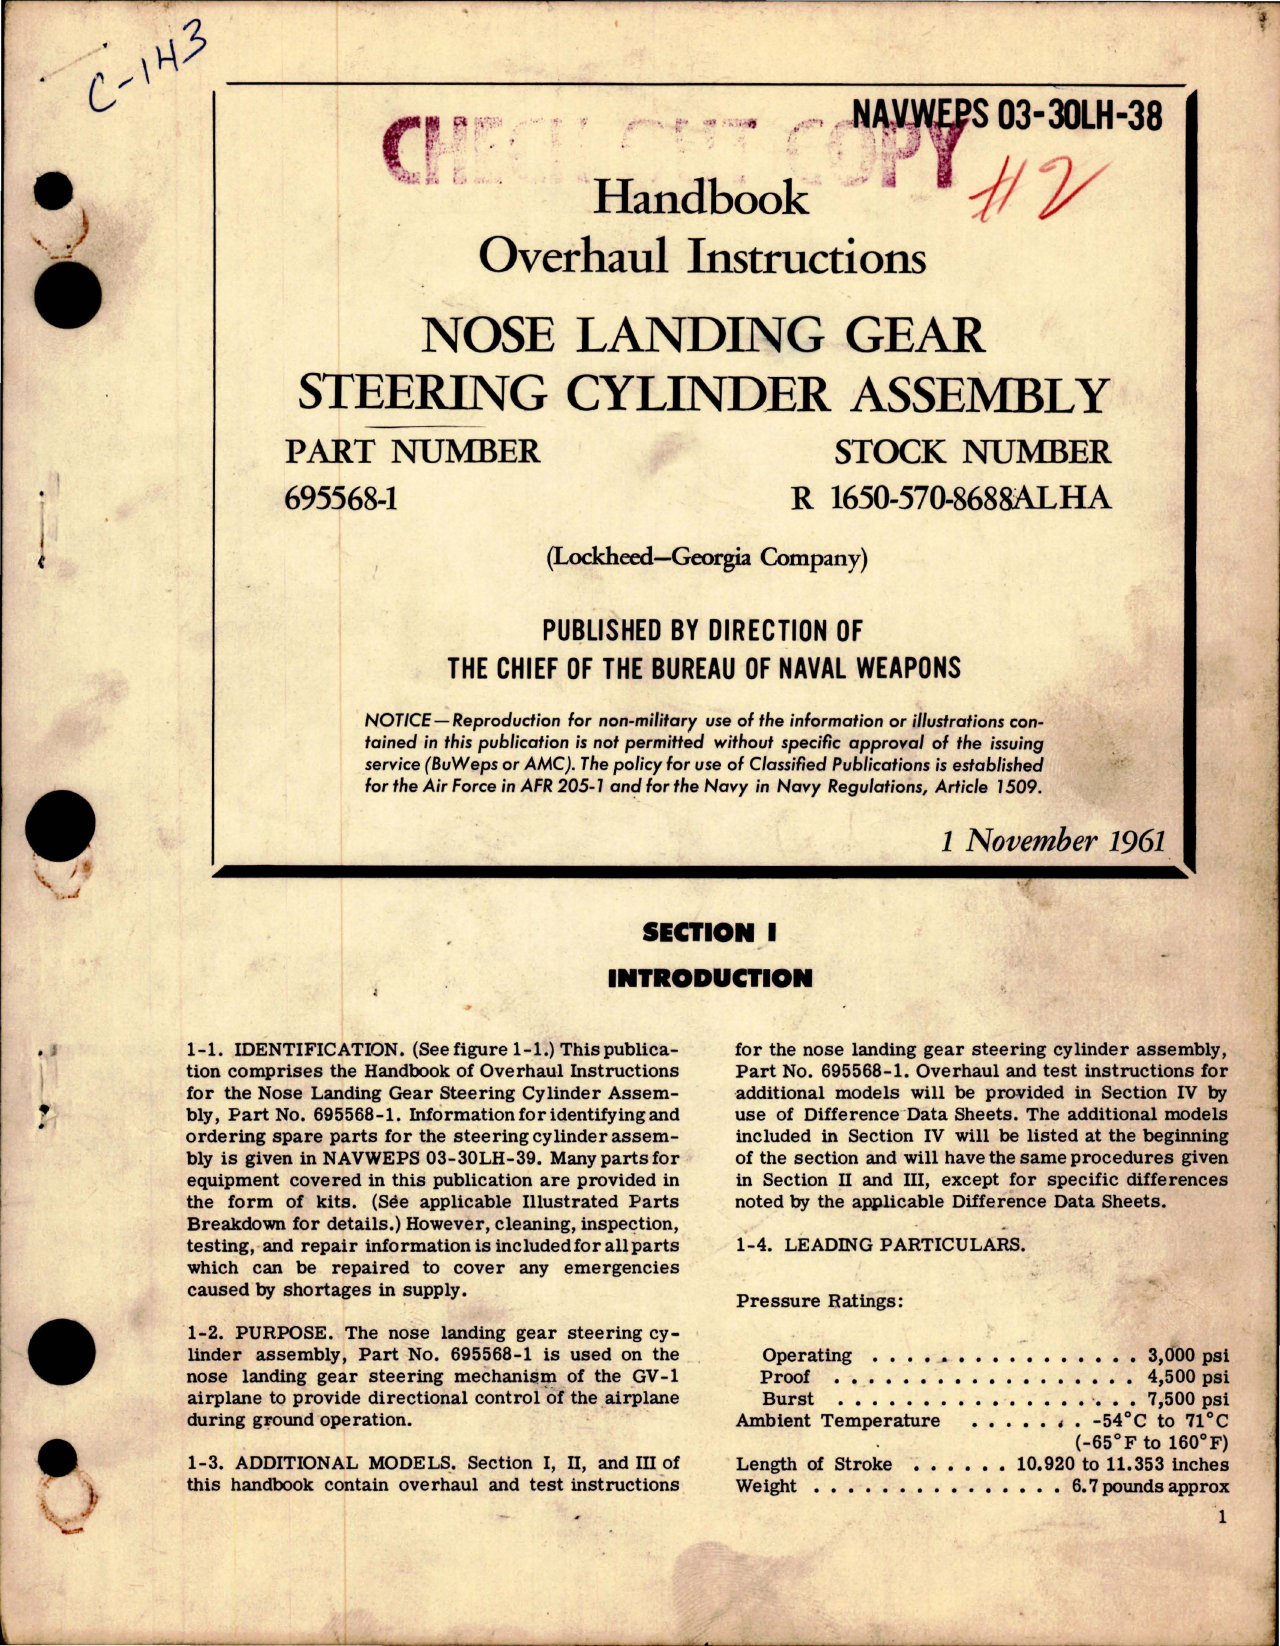 Sample page 1 from AirCorps Library document: Overhaul Instructions for Nose Landing Gear - Steering Cylinder Assembly - Part 695568-1